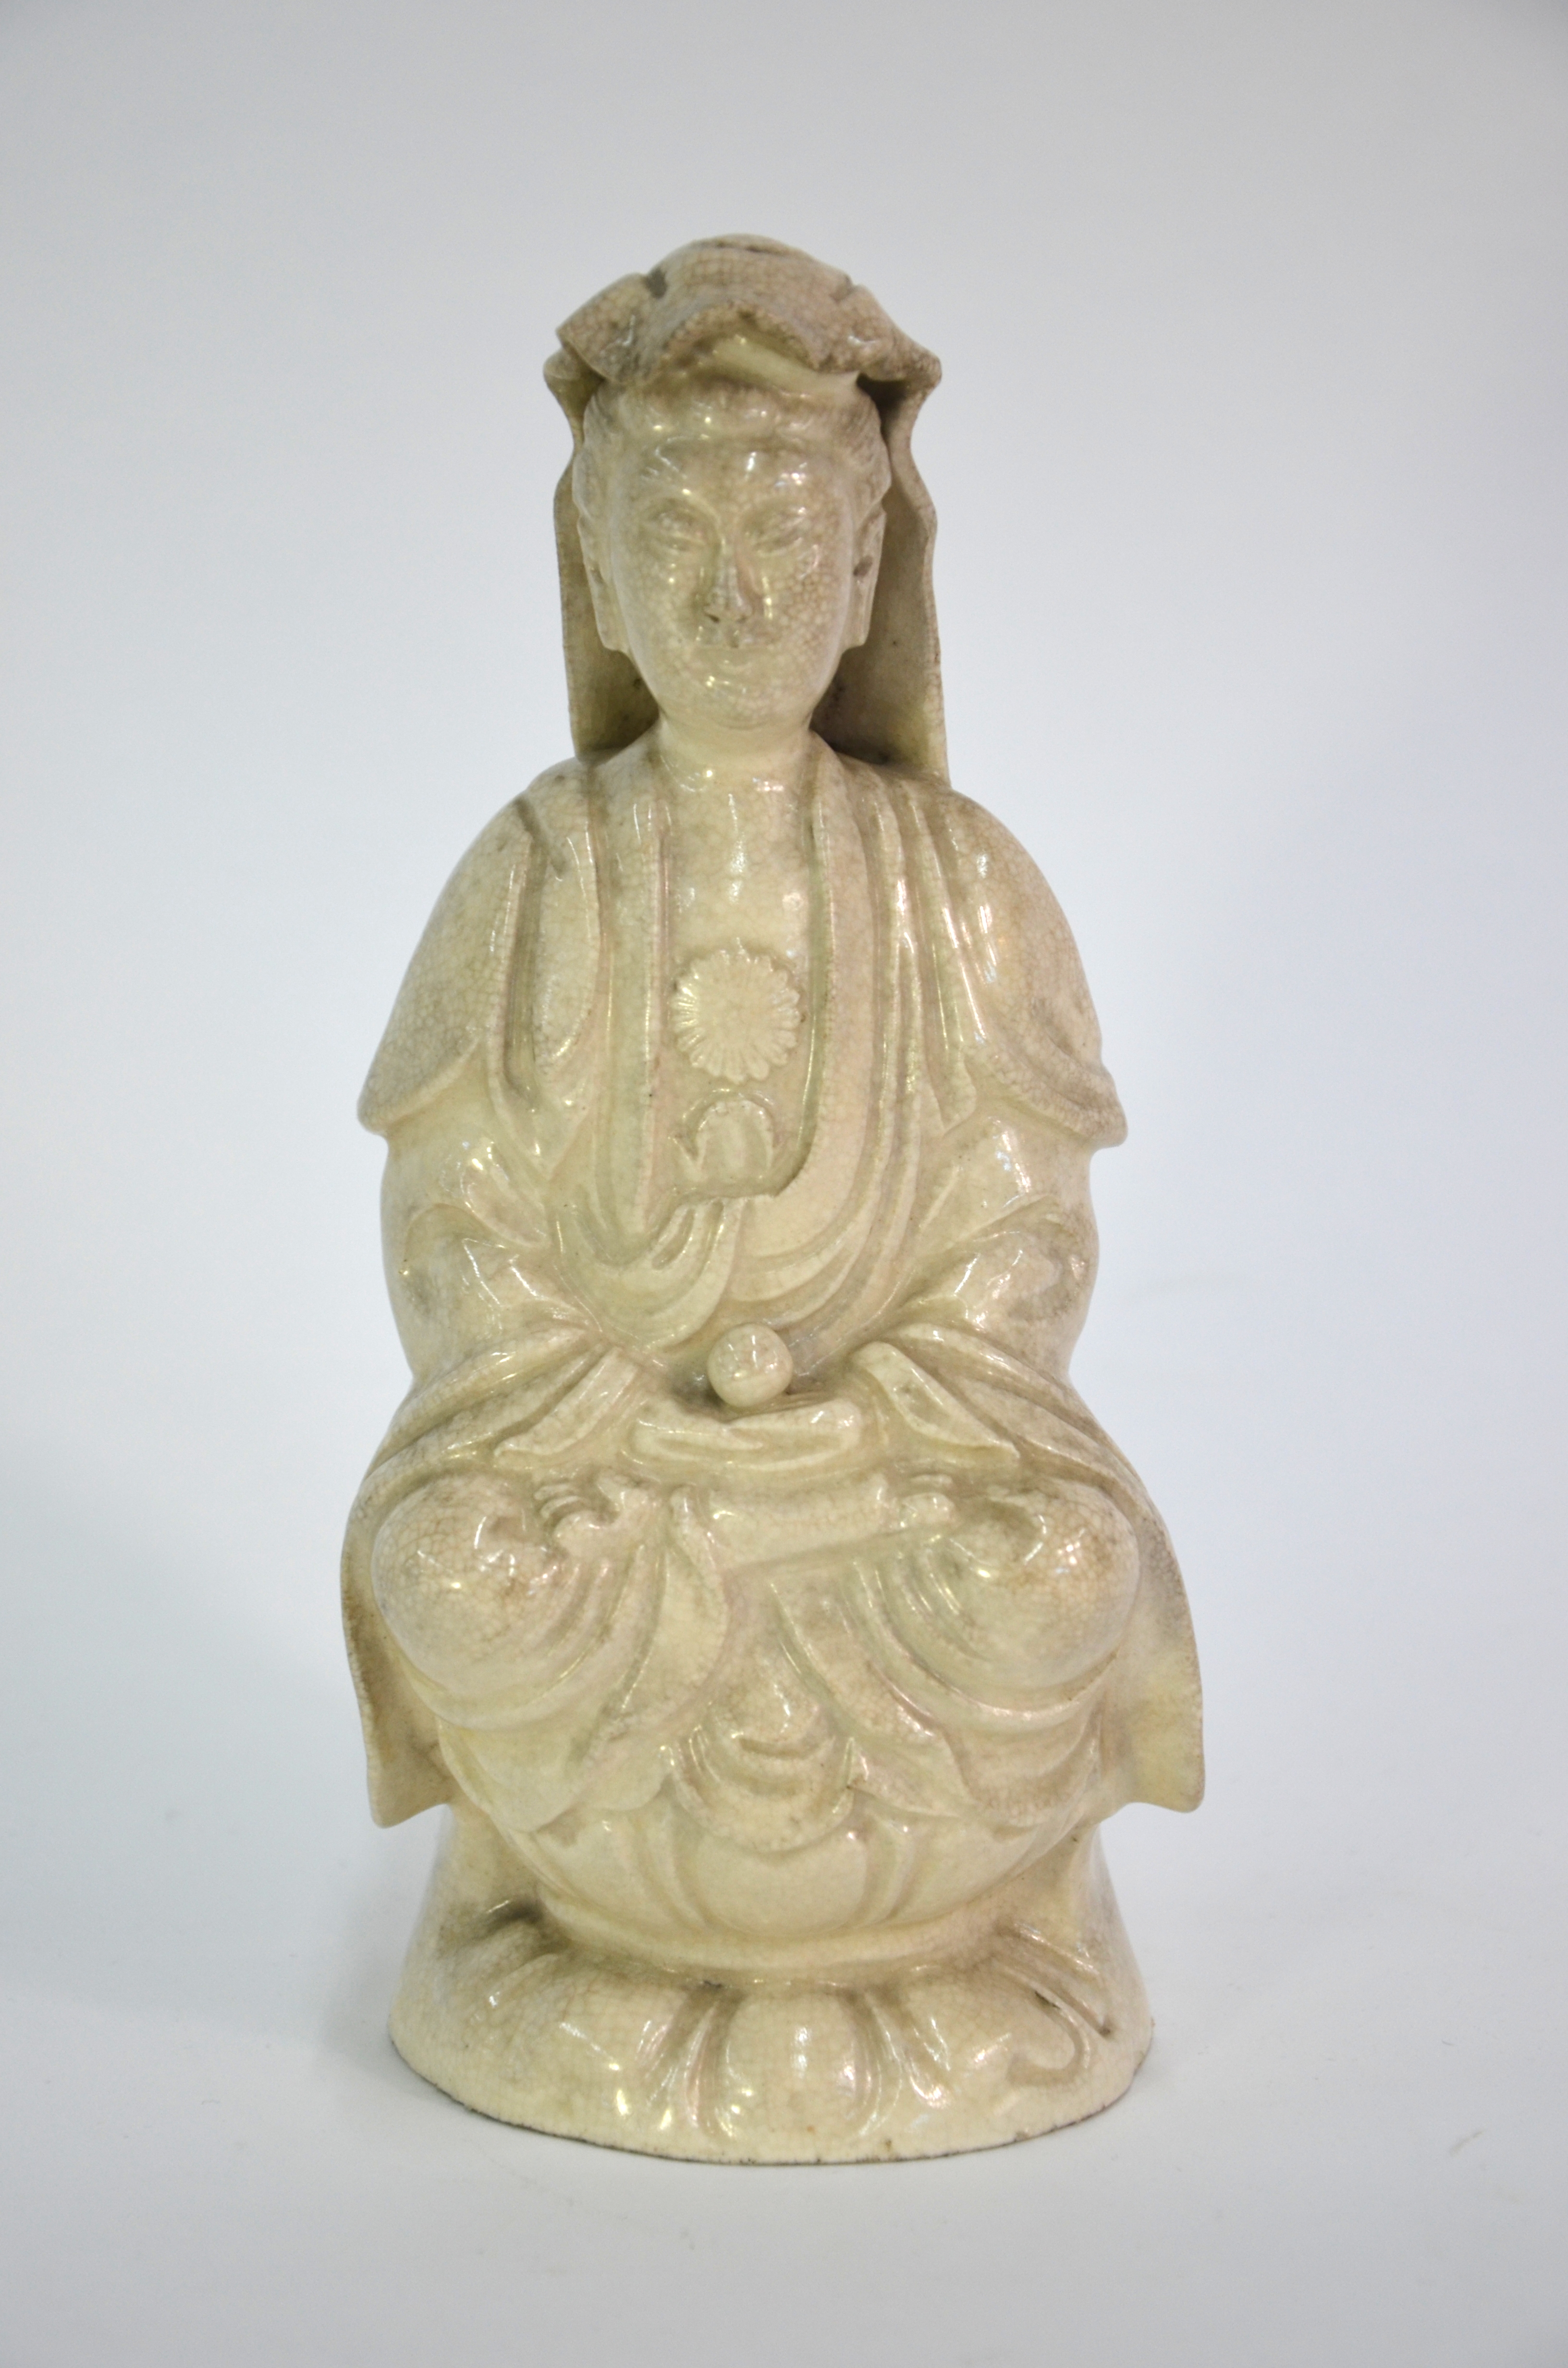 A blanc-de-chine style figure of Guanyin, the Bodhisattva of Mercy; seated in dhyanasana on a - Image 3 of 8